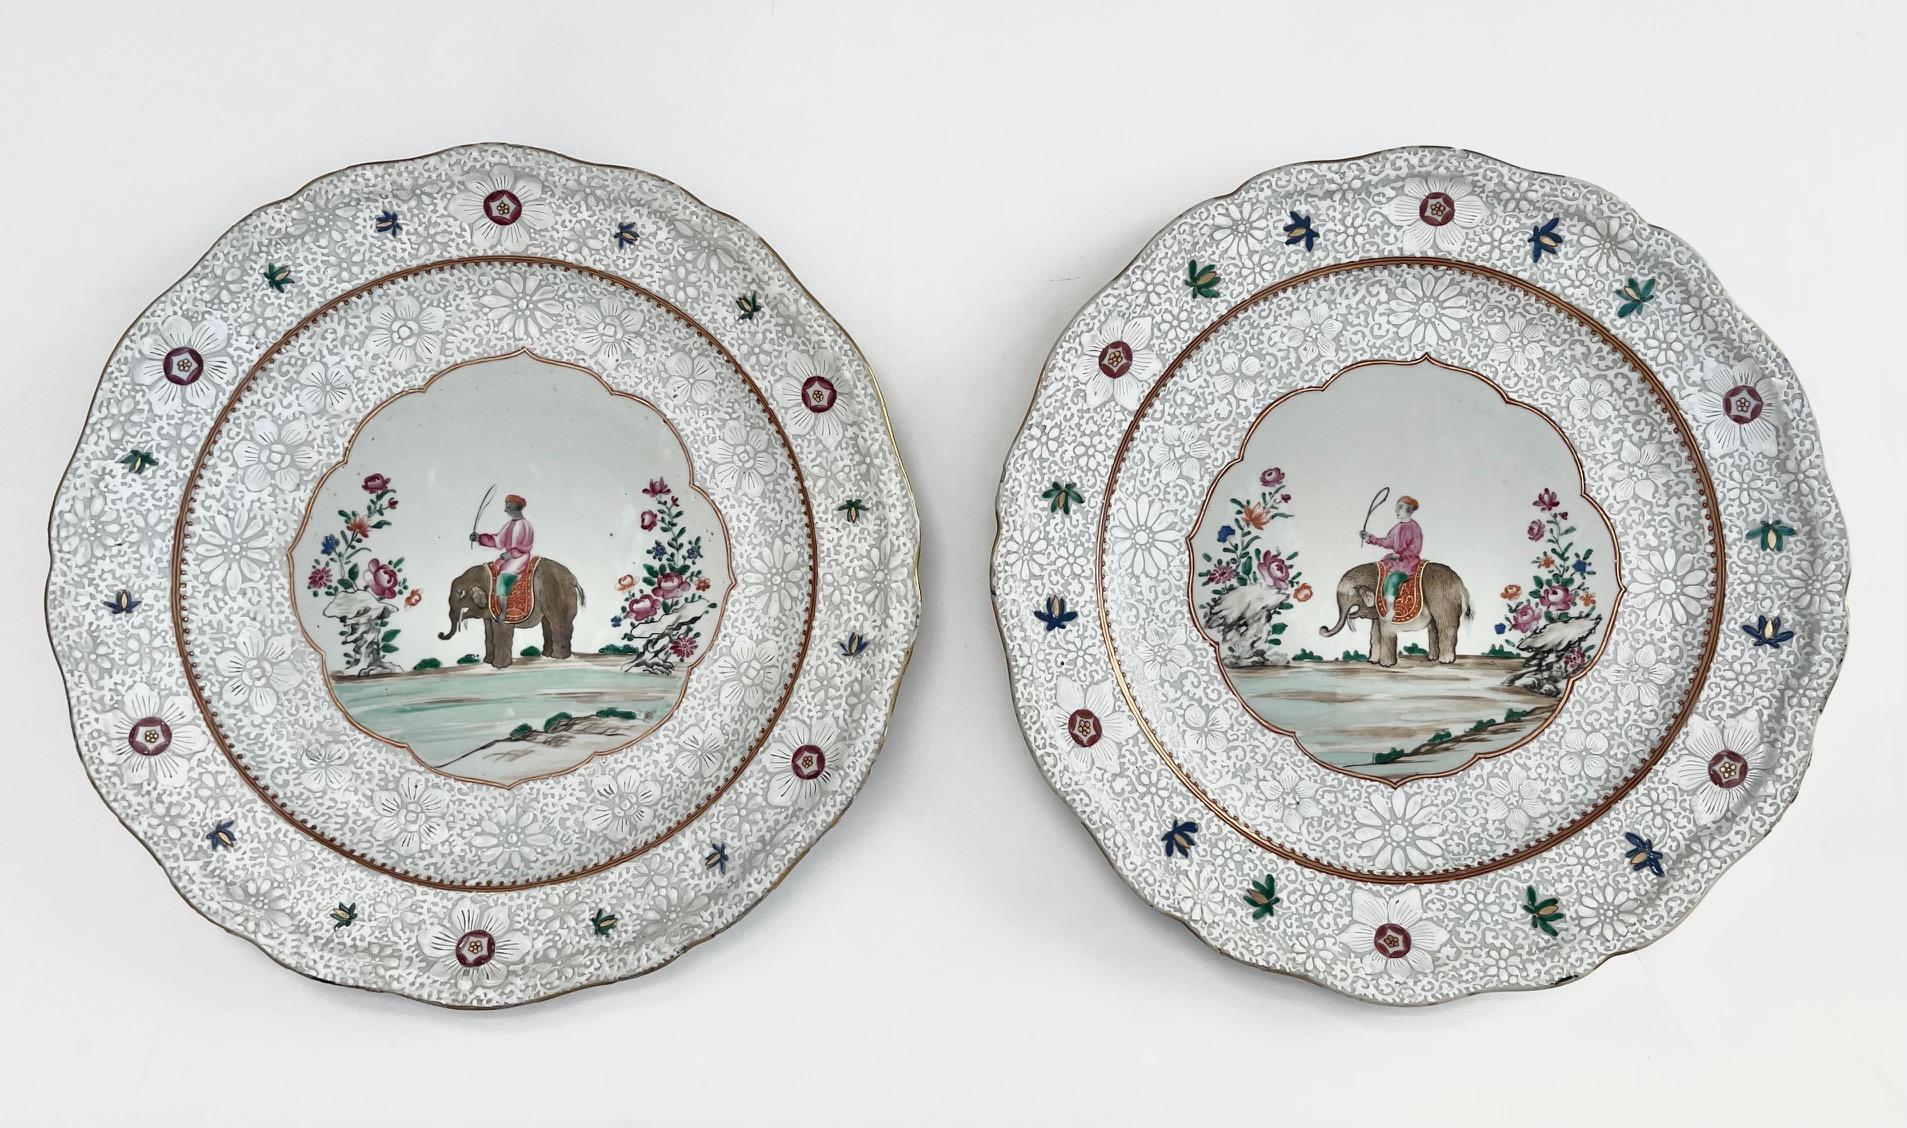 A very fine and exceptionally rare pair of circa 1760 Qianlong period Chinese export for the Anglo-Indian market chargers of large size, the molded and scallop-shaped bodies painted with delicately enameled 'bianco-sopra-bianco' floral borders with